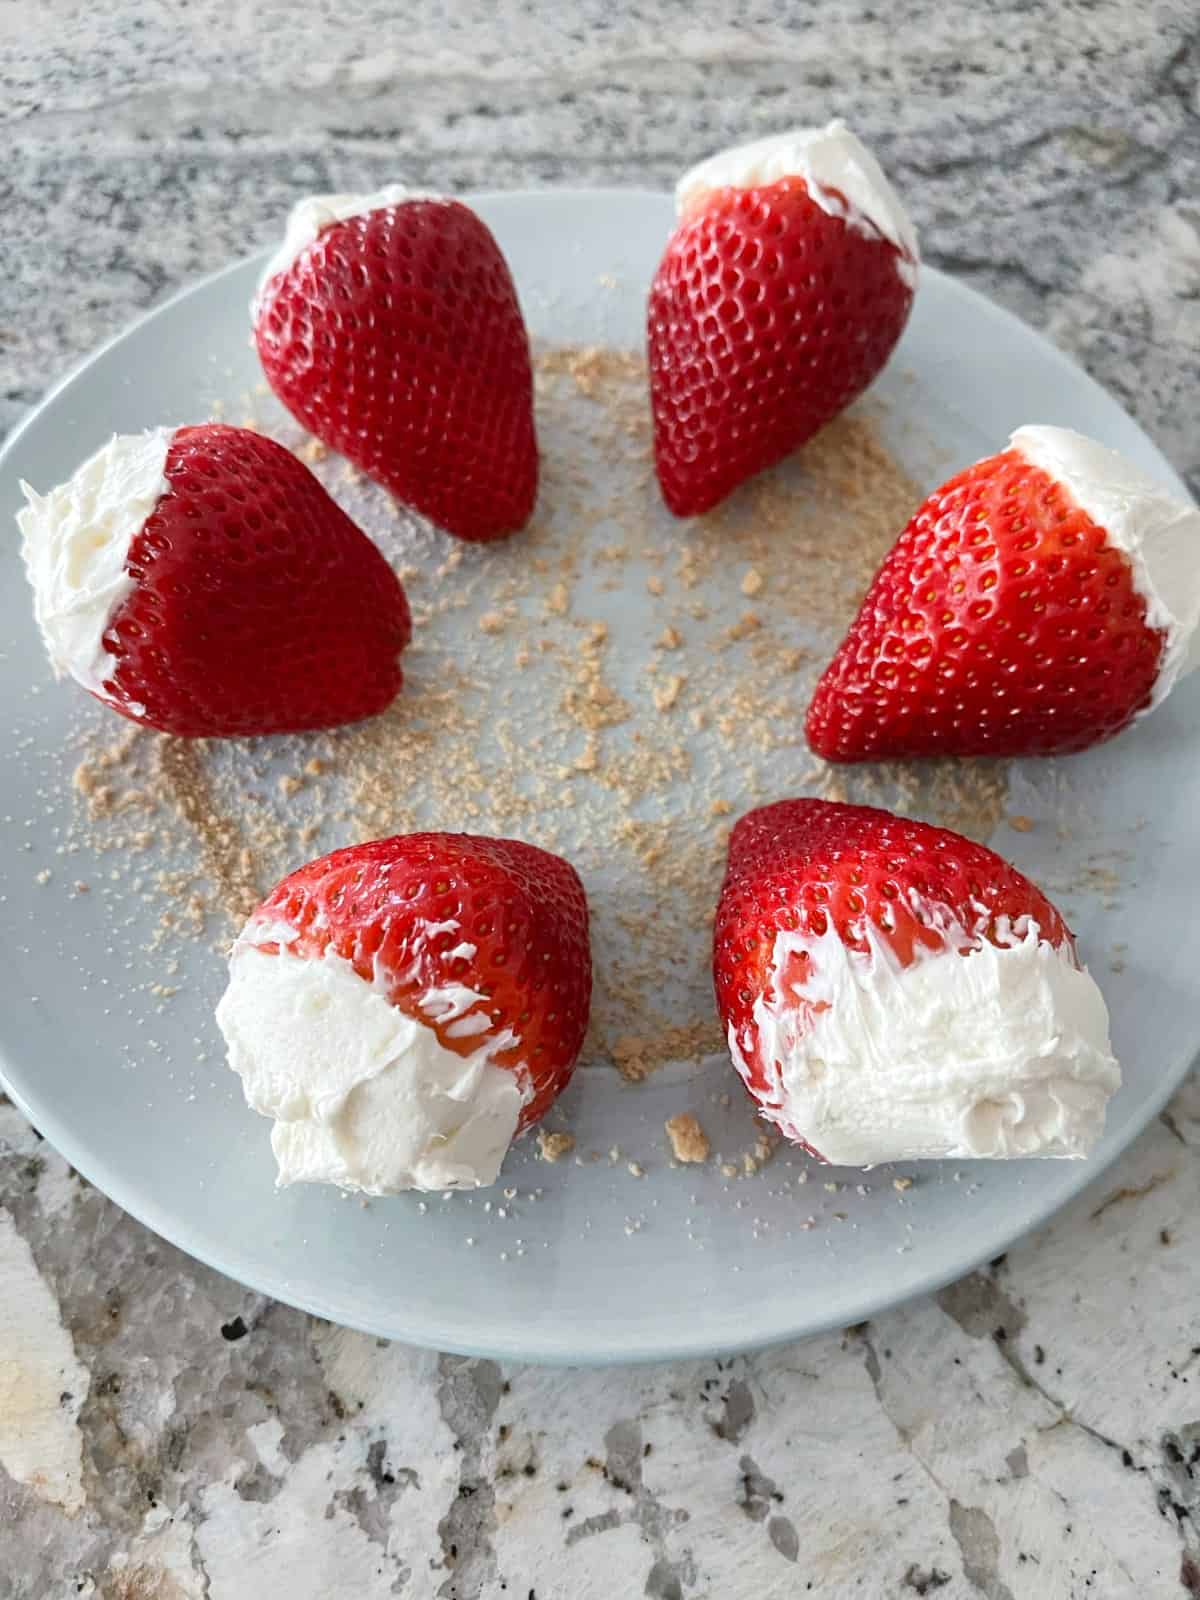 Cheesecake stuffed strawberries on round plate sprinkled with graham cracker crumbs.